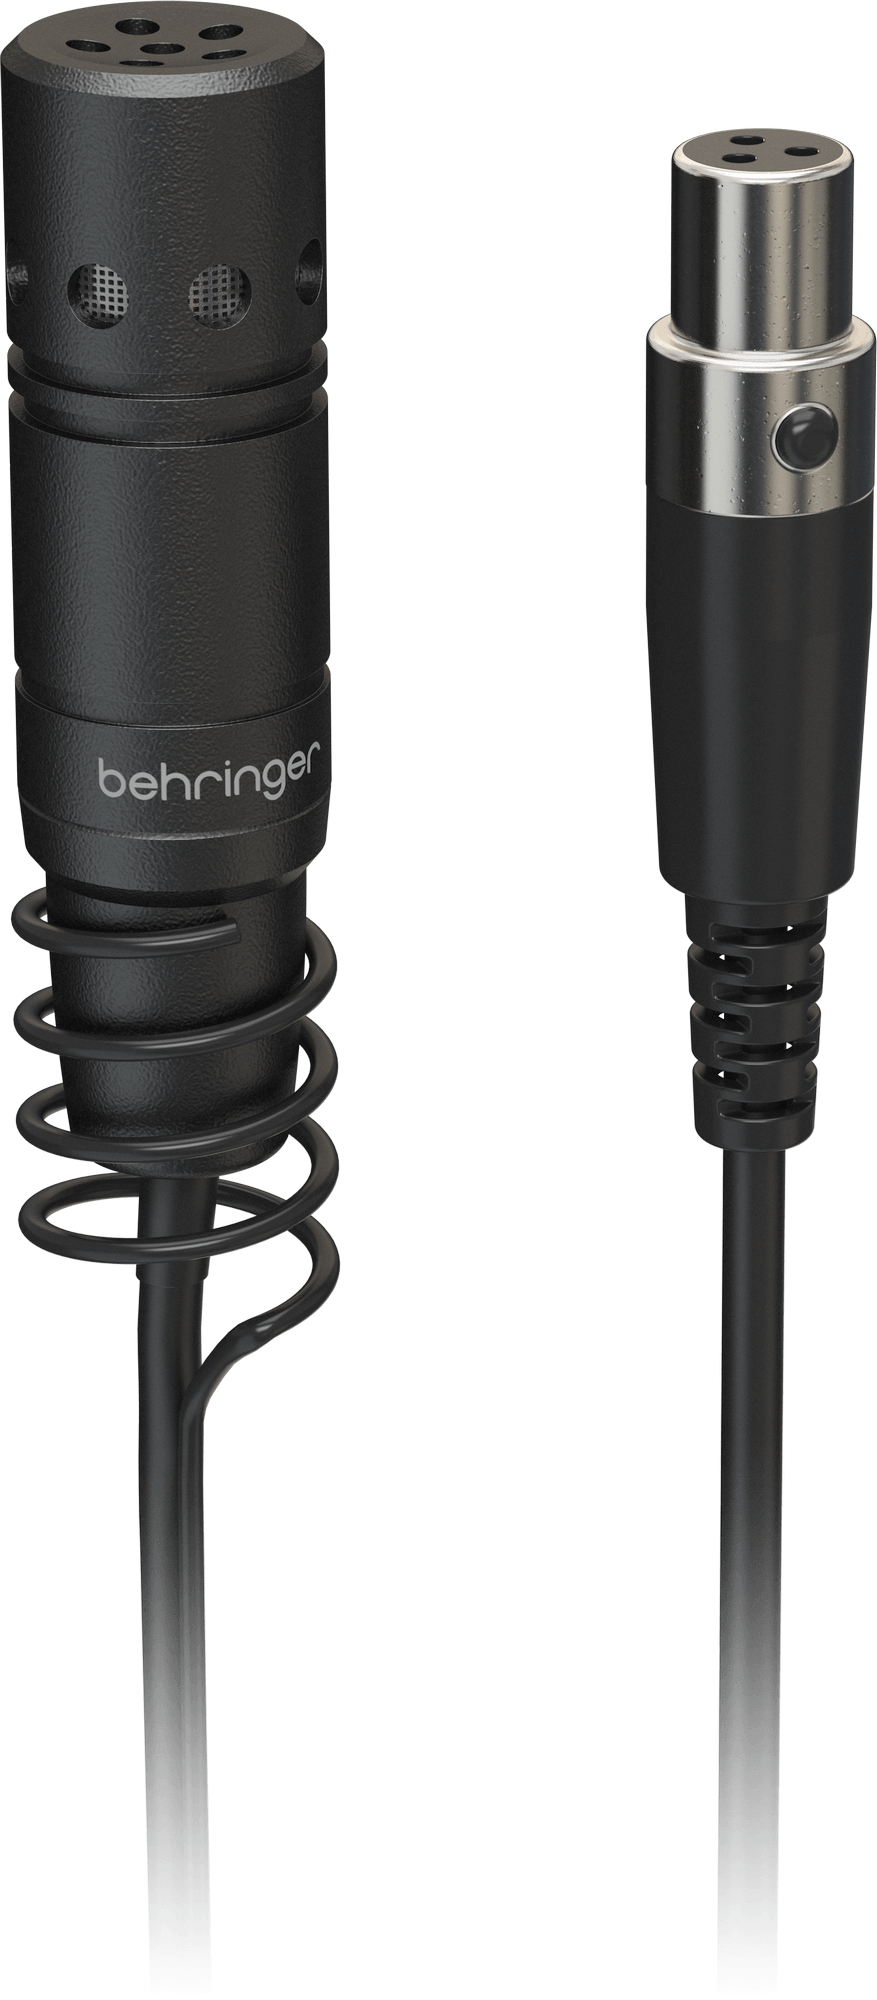 Behringer HM50 Condenser Hanging Microphone - Zoso Music